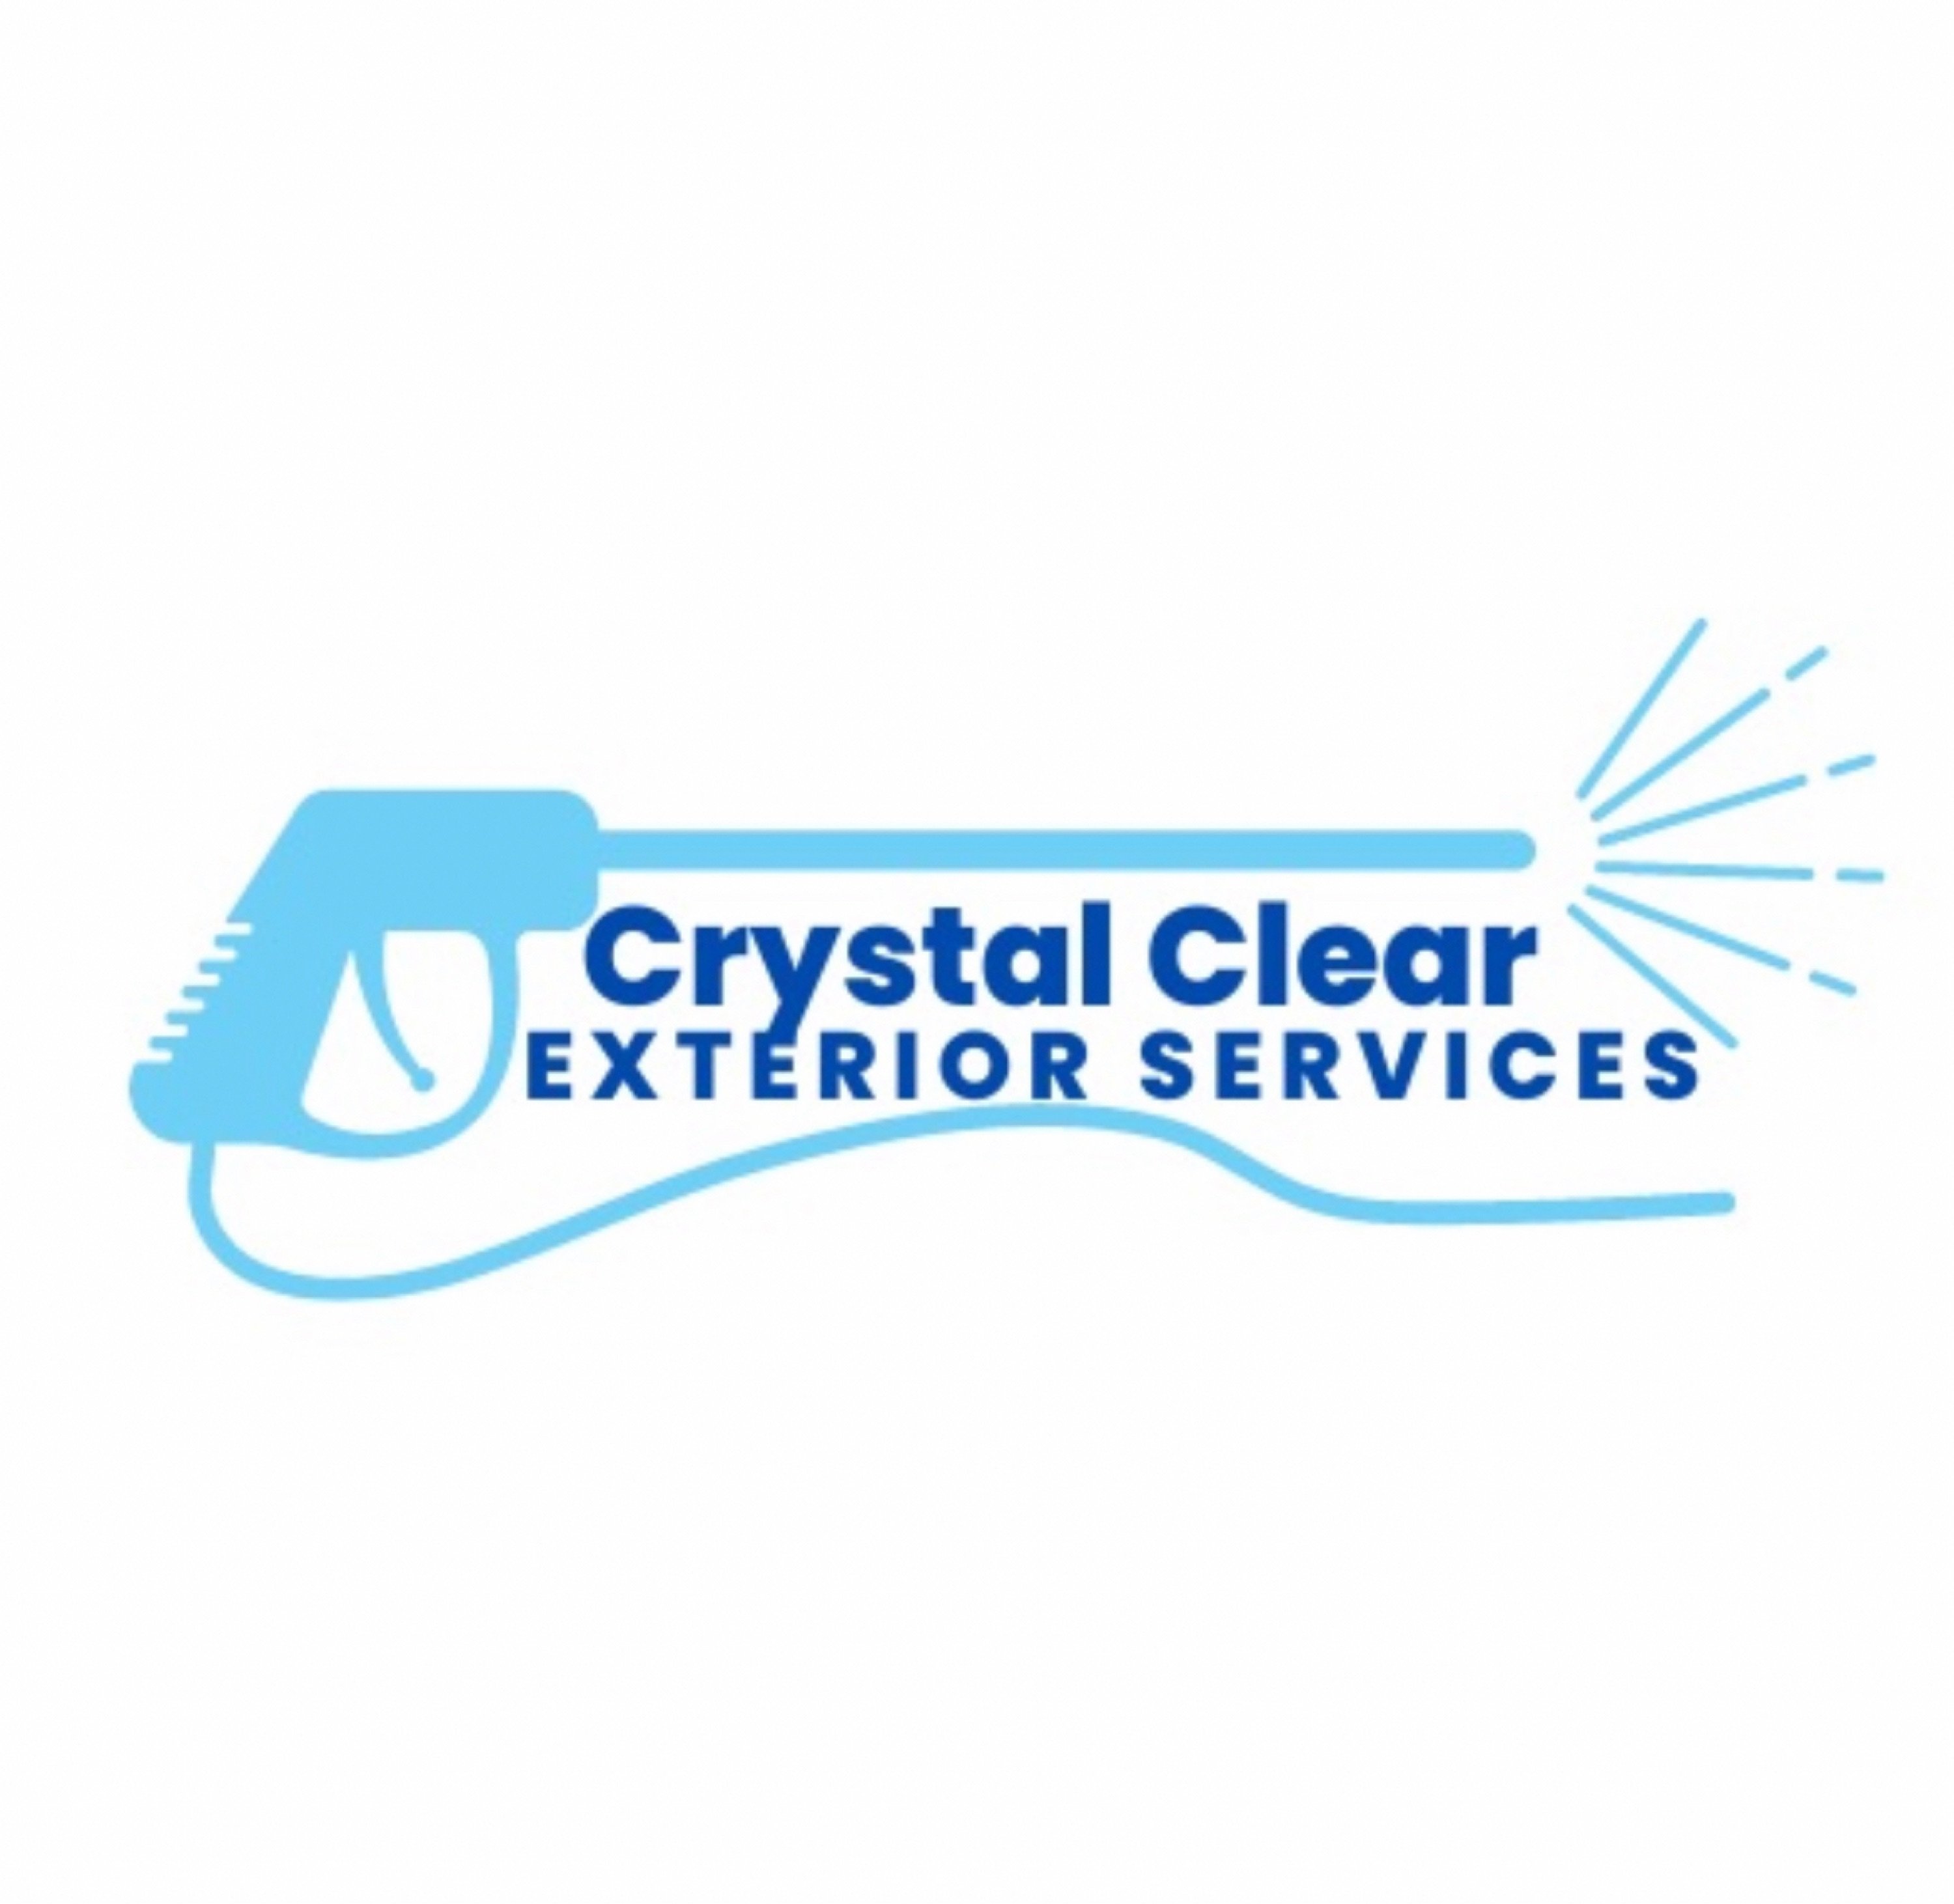 Crystal Clear Exterior Services Logo